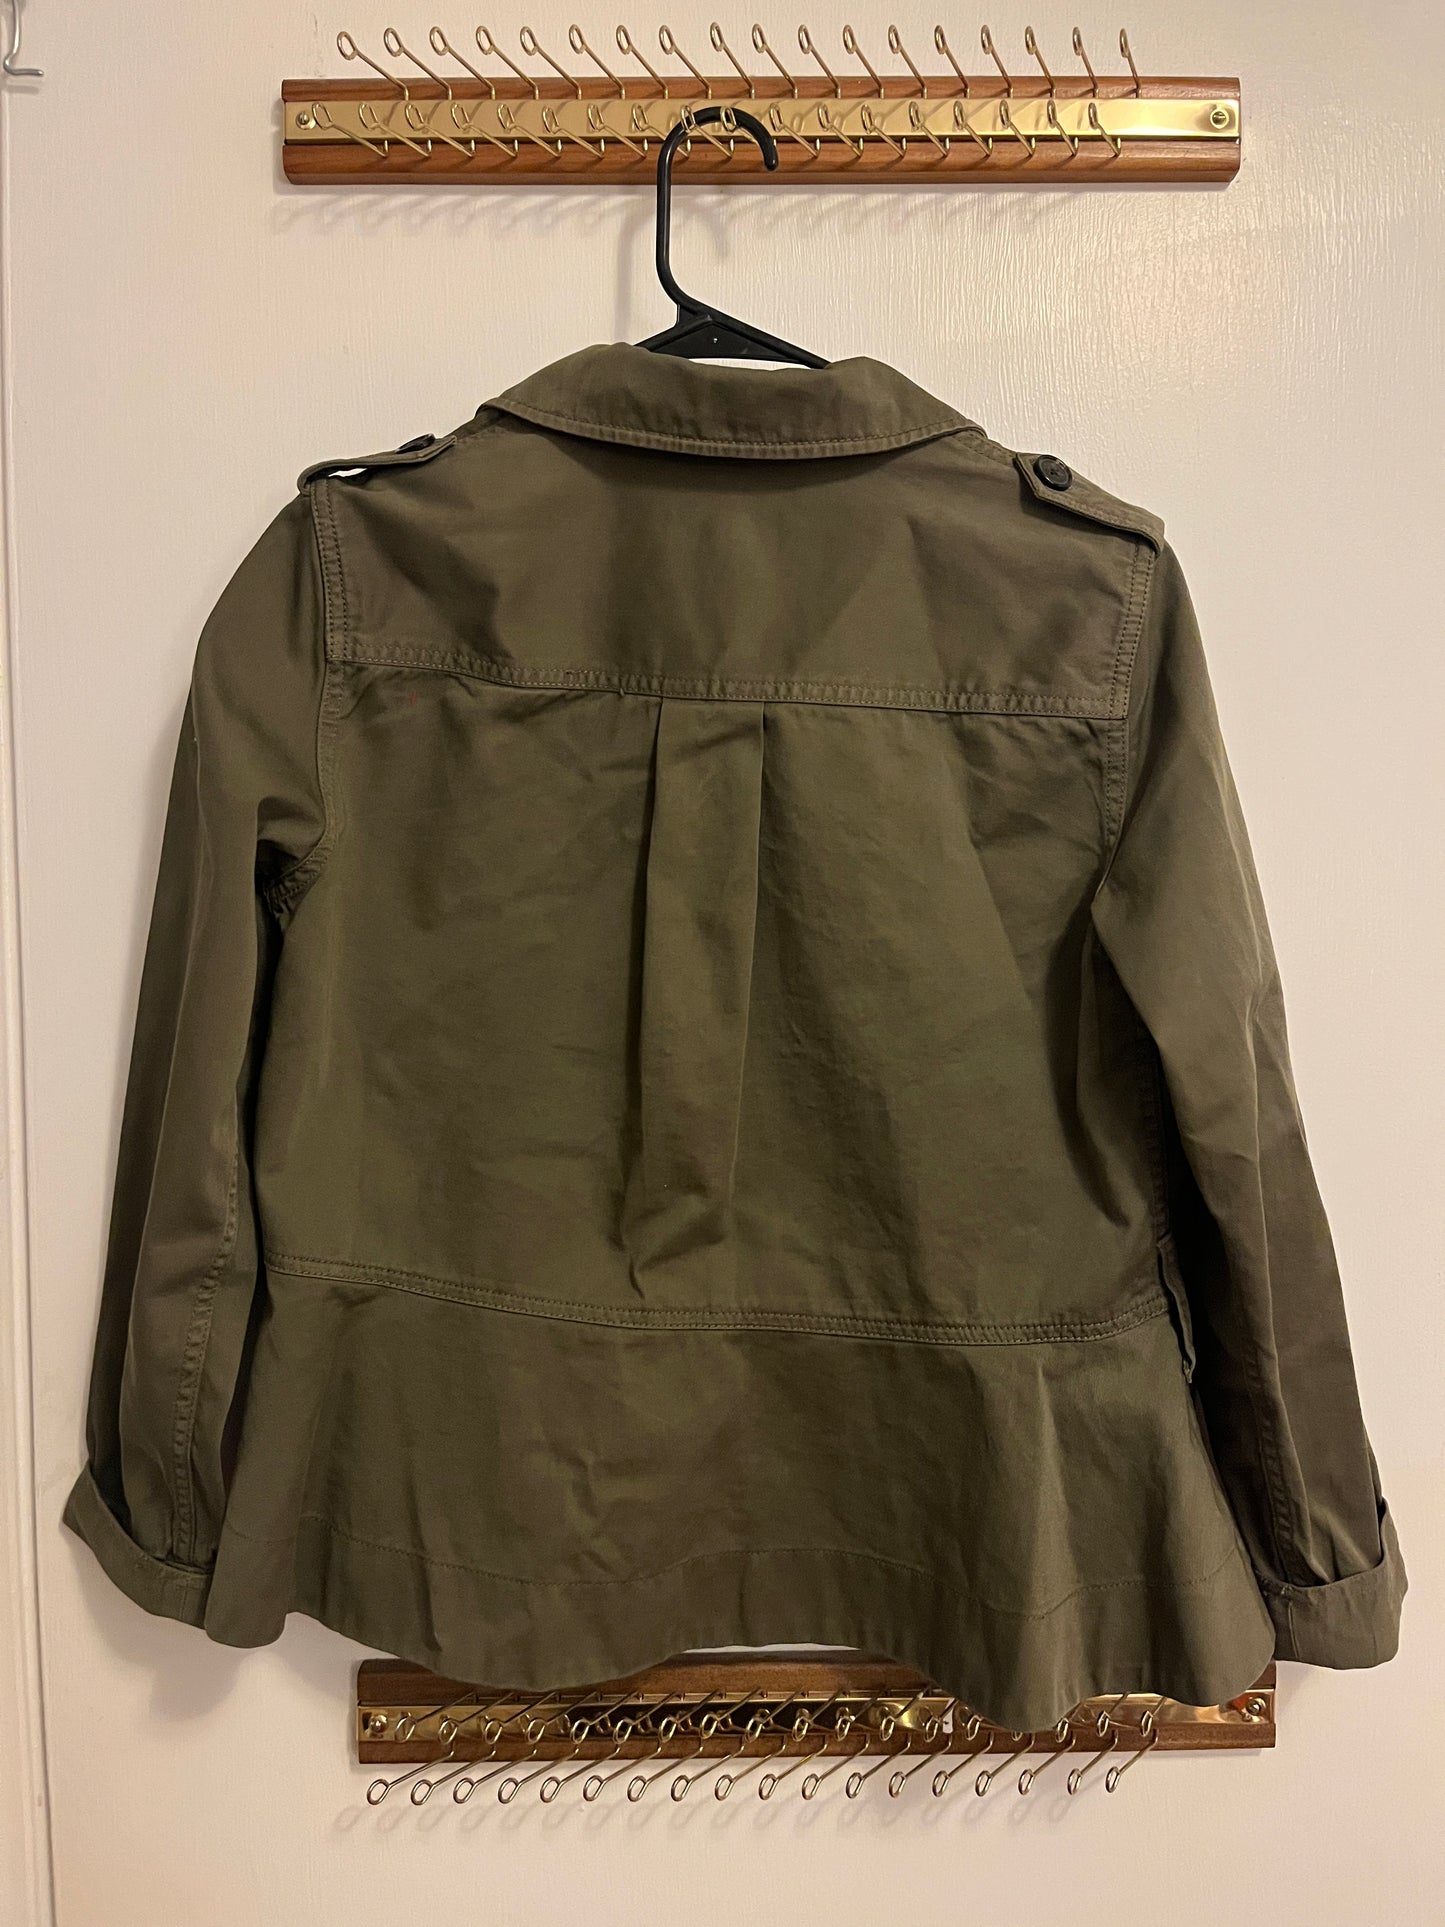 Womens J. Crew Jacket - army green size small